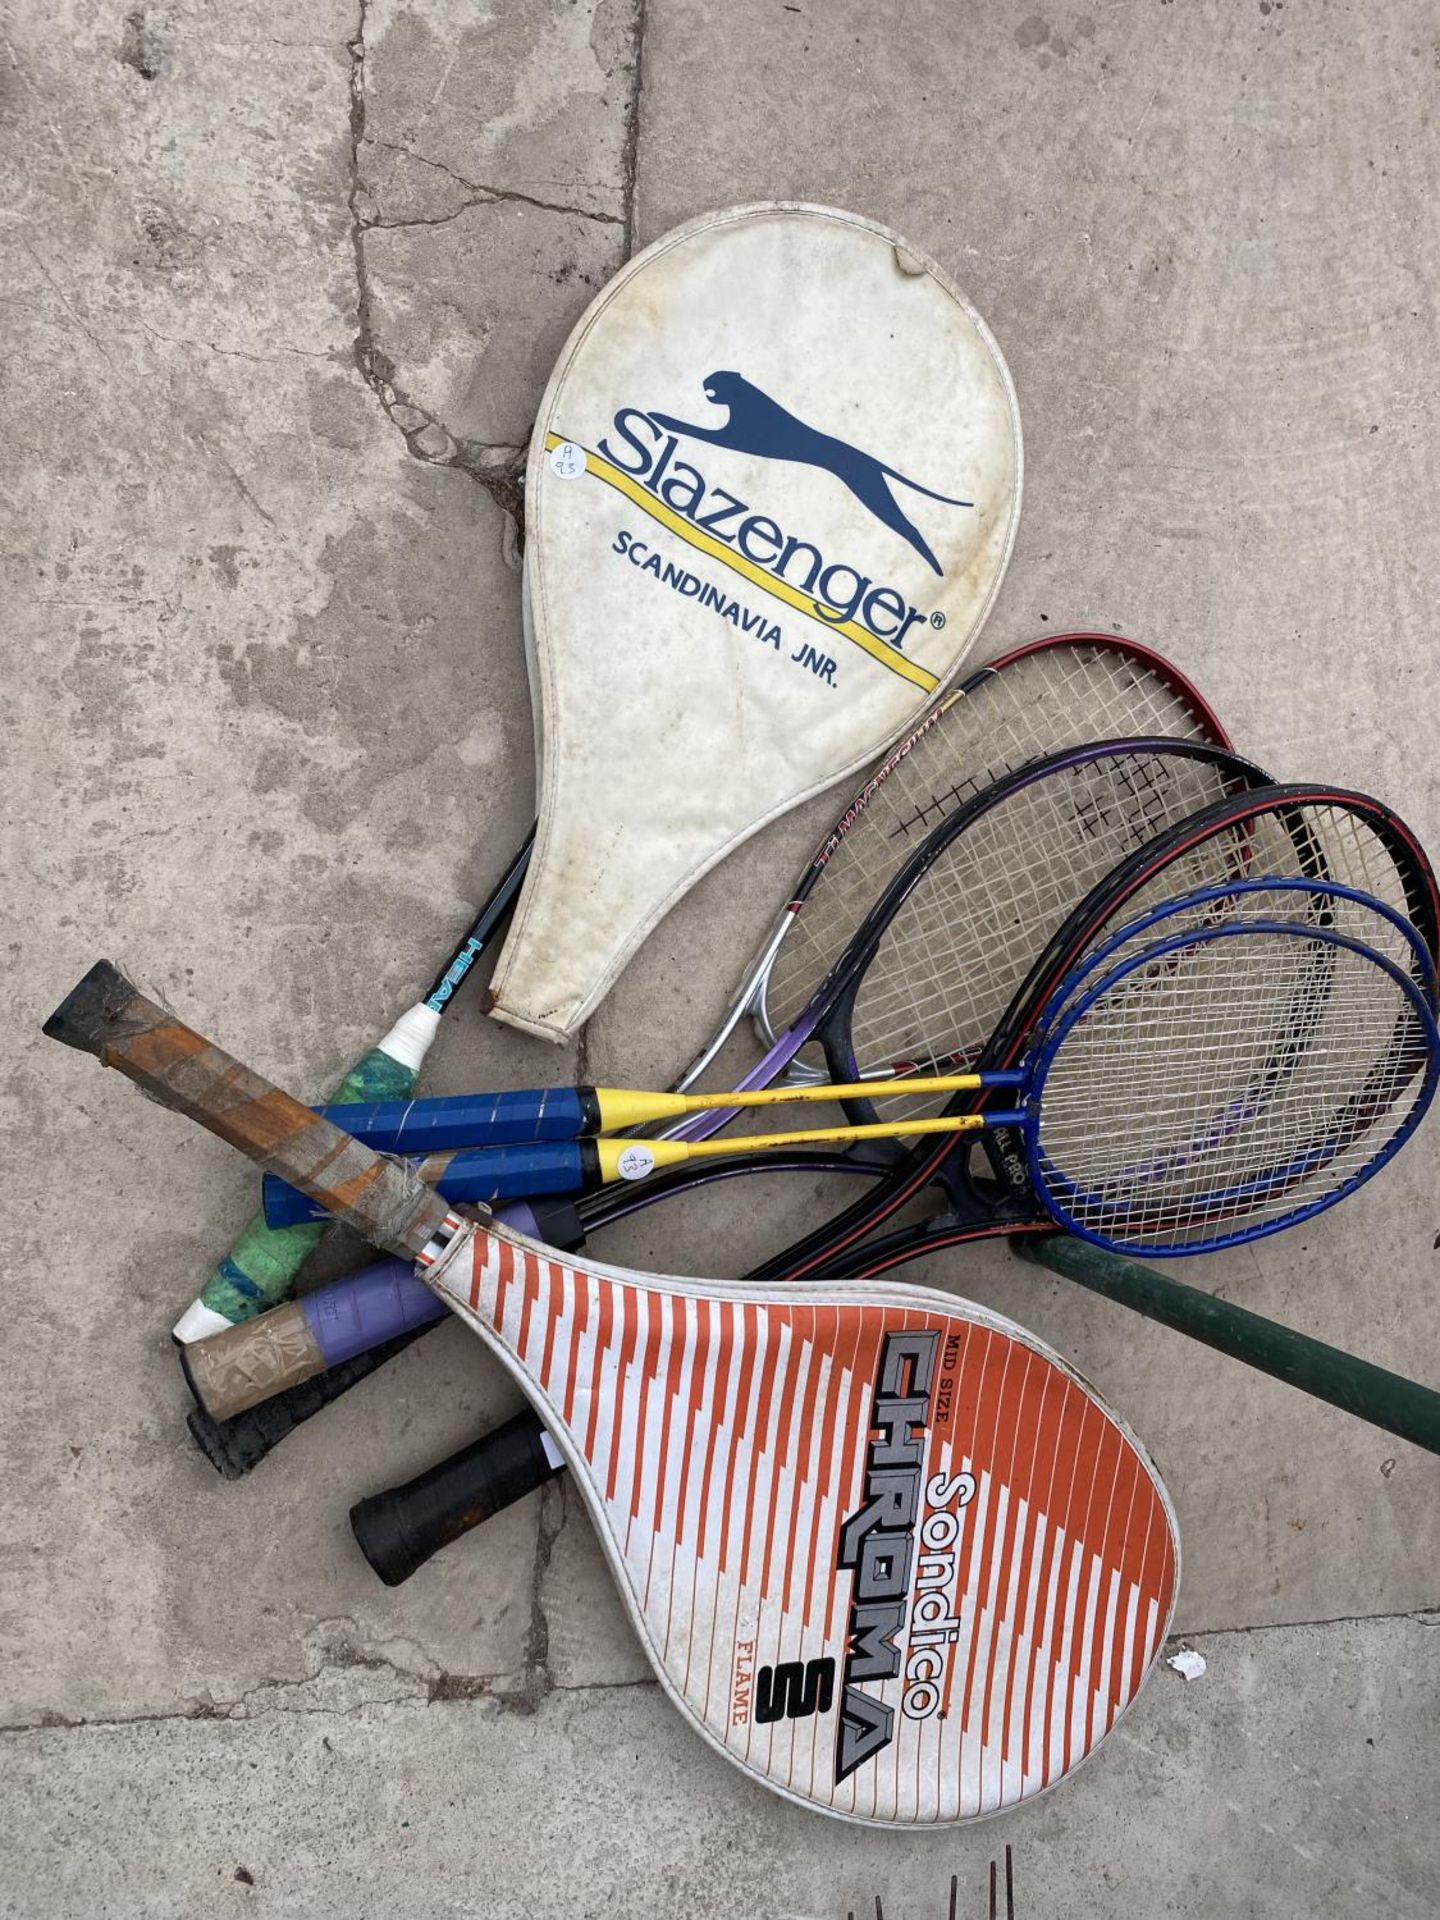 A COLLECTION OF 7 TENNIS AND BADMINTON RACKETS - Image 2 of 2